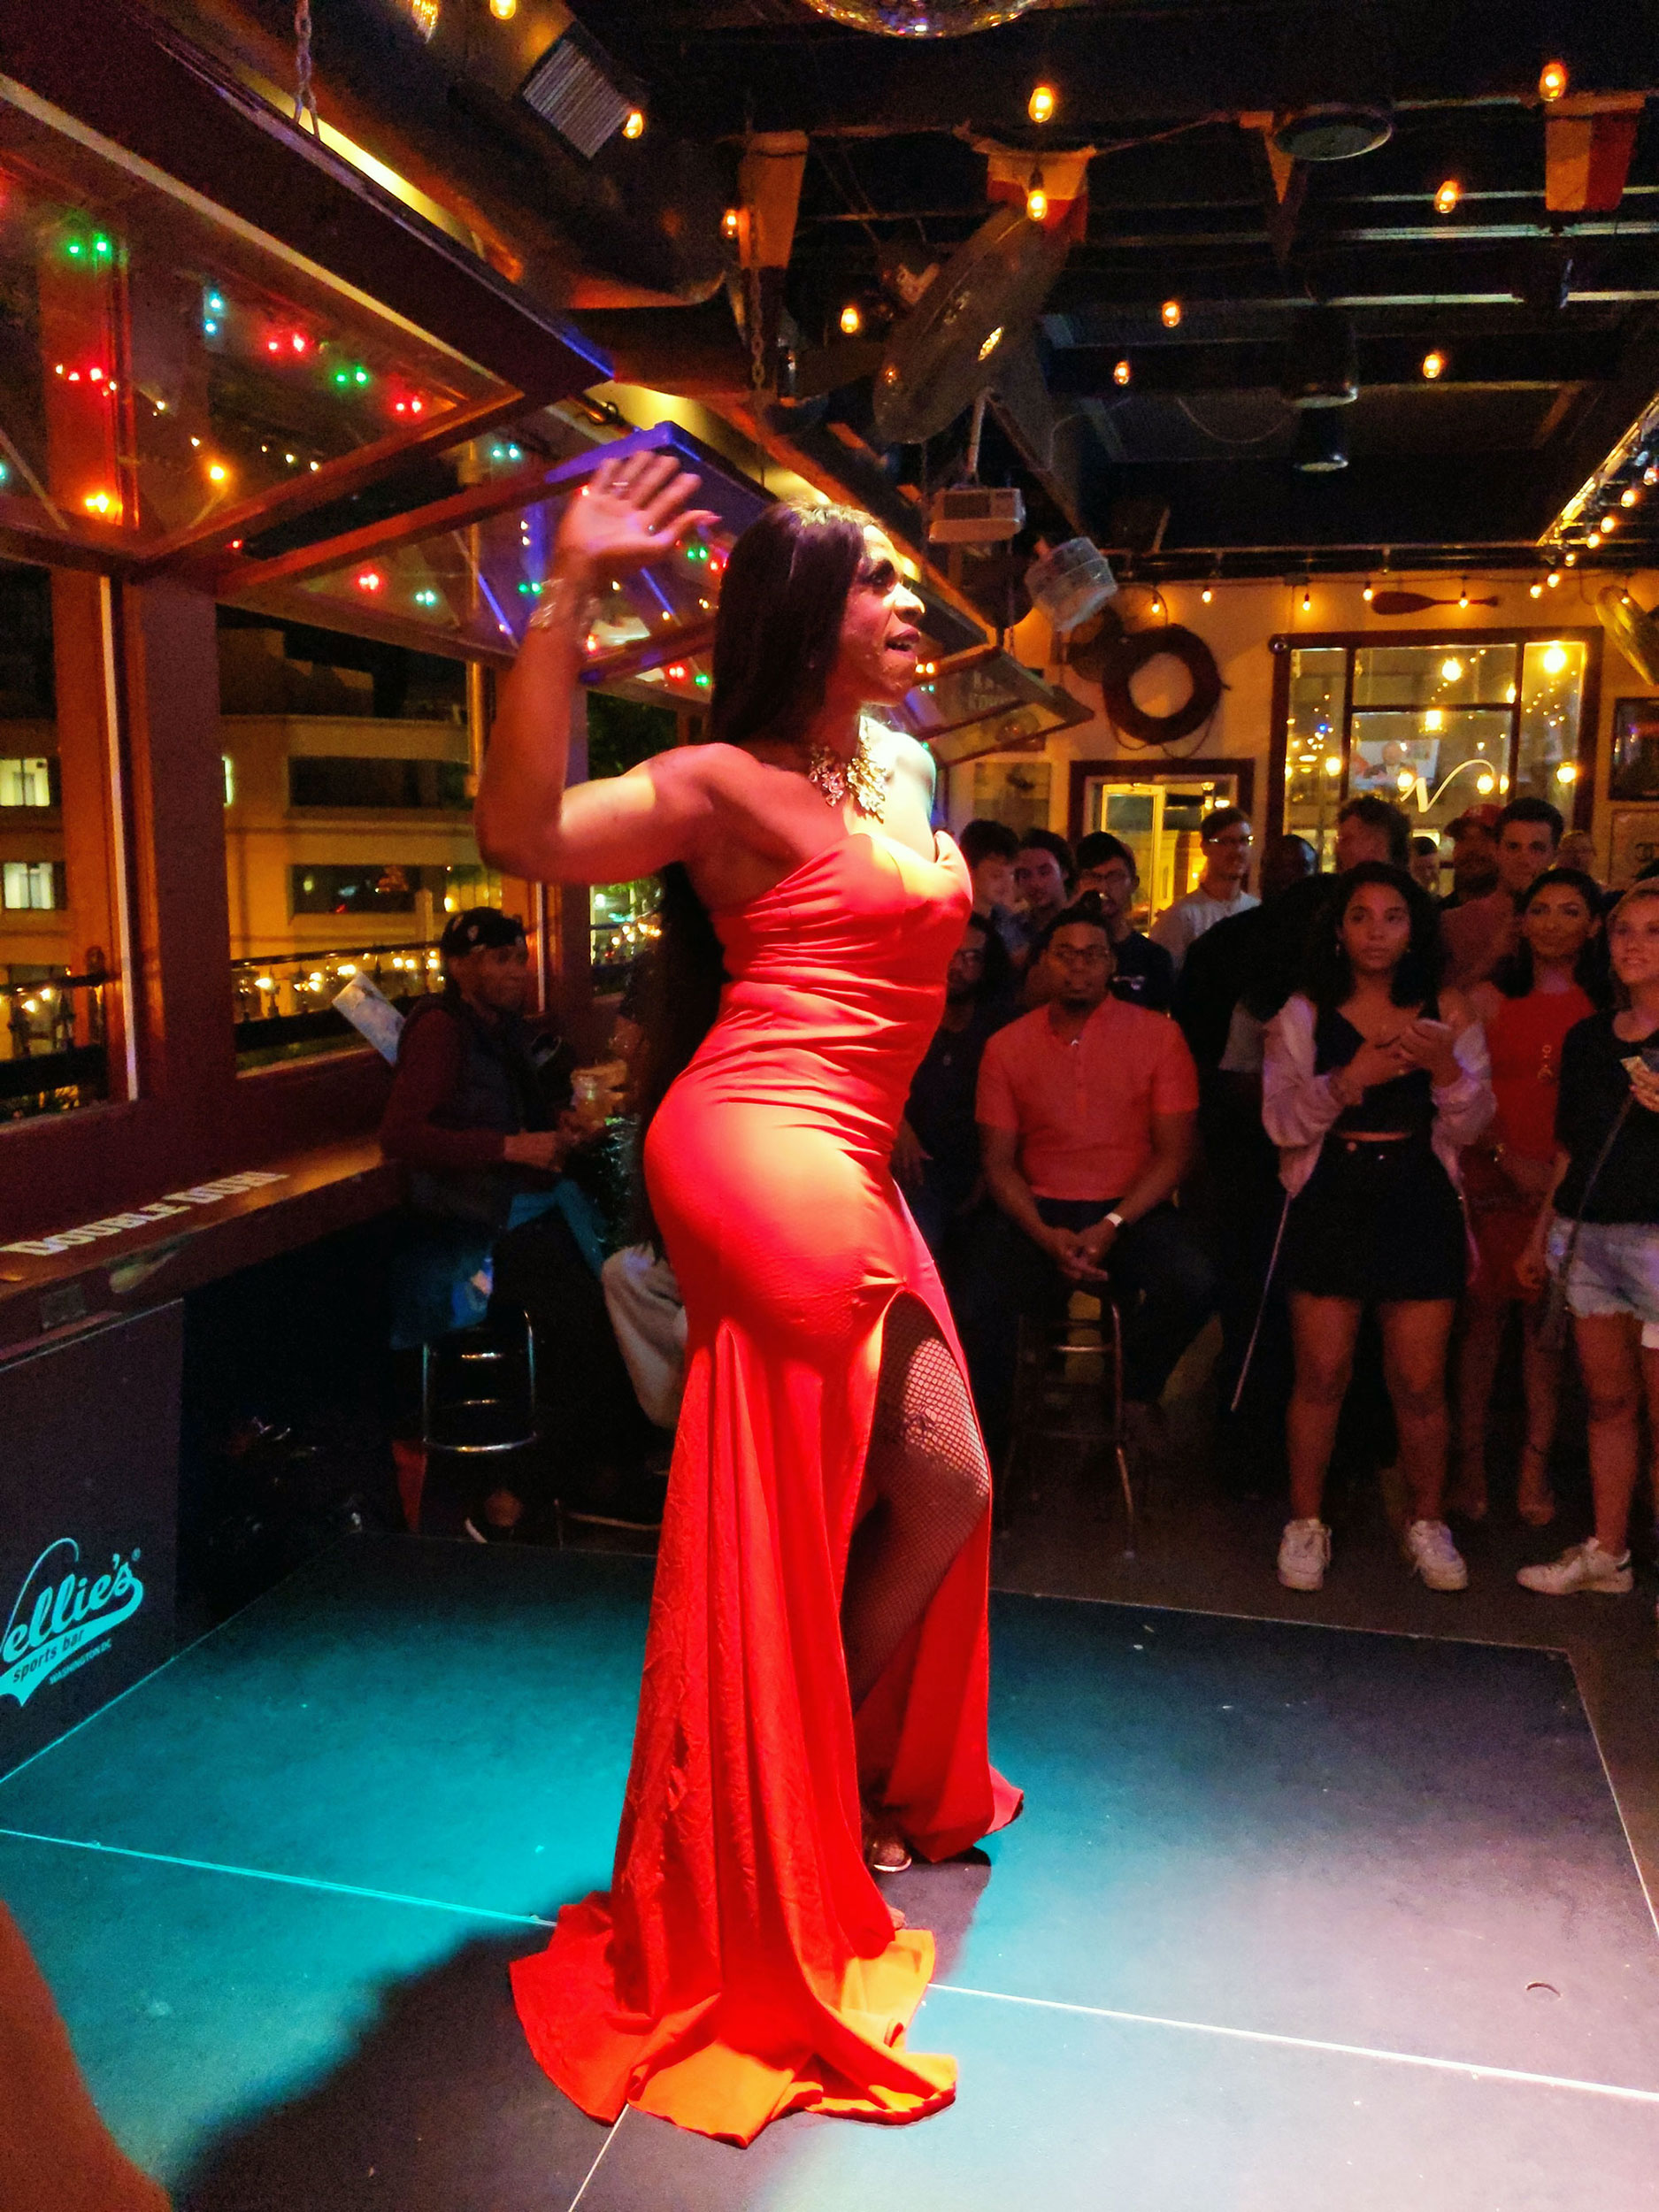 A drag queen performing at Nellie's Sports Bar.